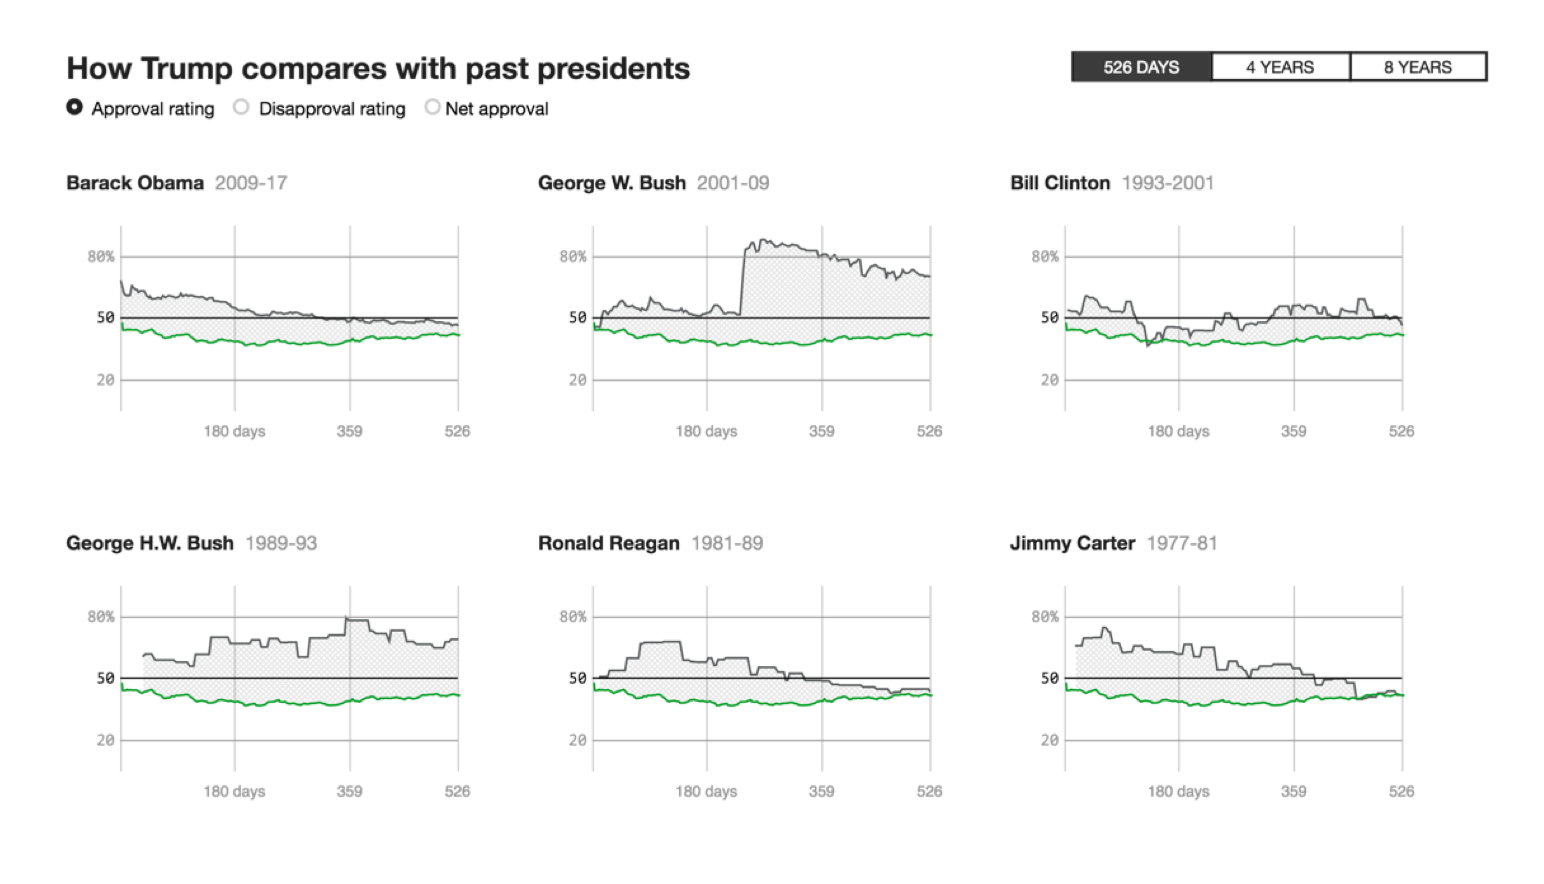 Trump compares with past presidents - Data Story by FusionCharts